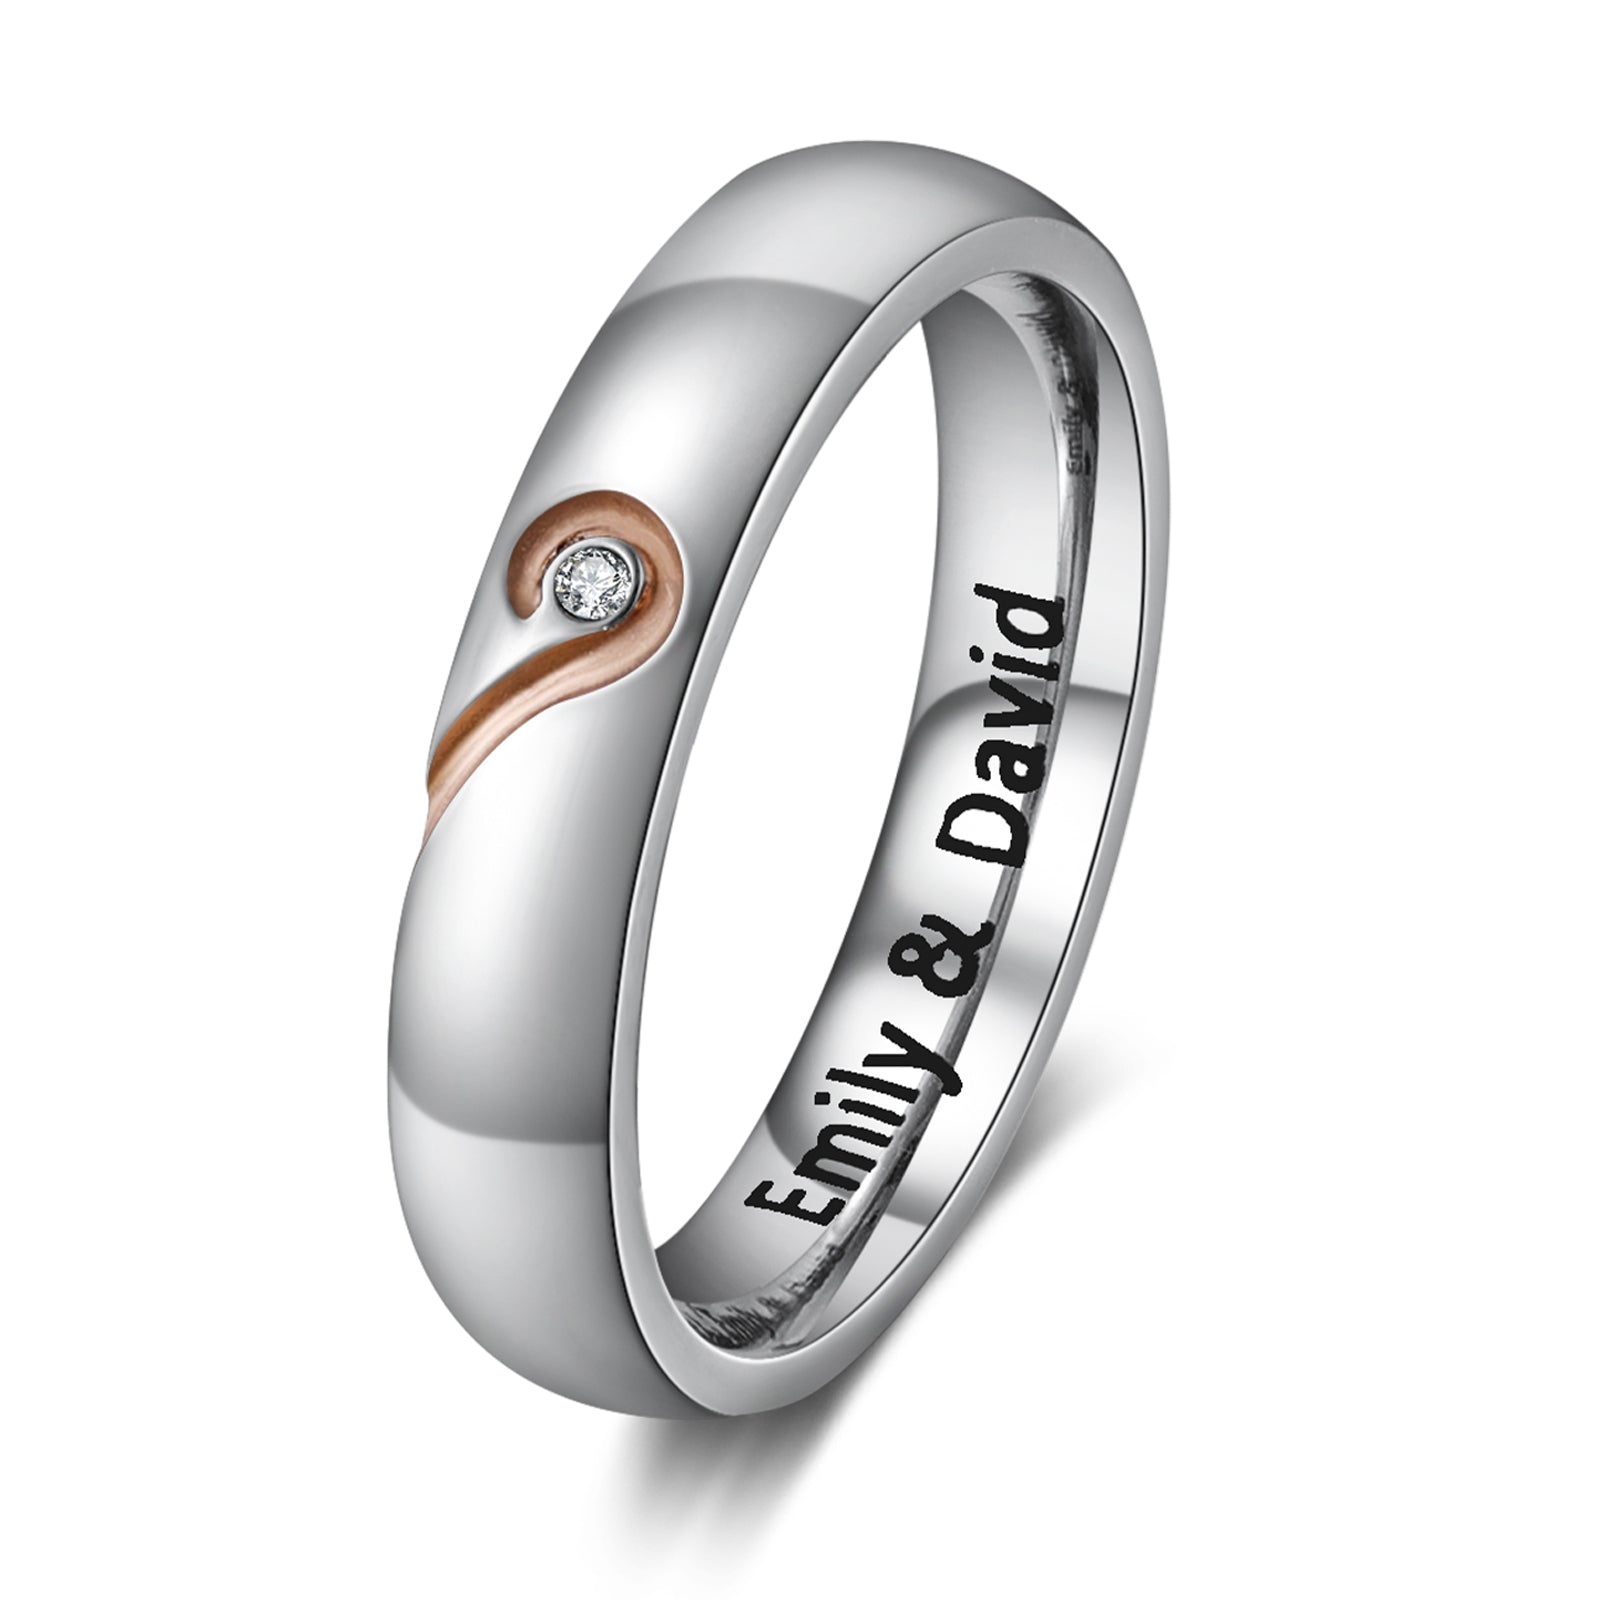 Think Engraved wedding Ring Personalized His and Hers Promise or Wedding Ring Set Matching Hearts Couples Rings